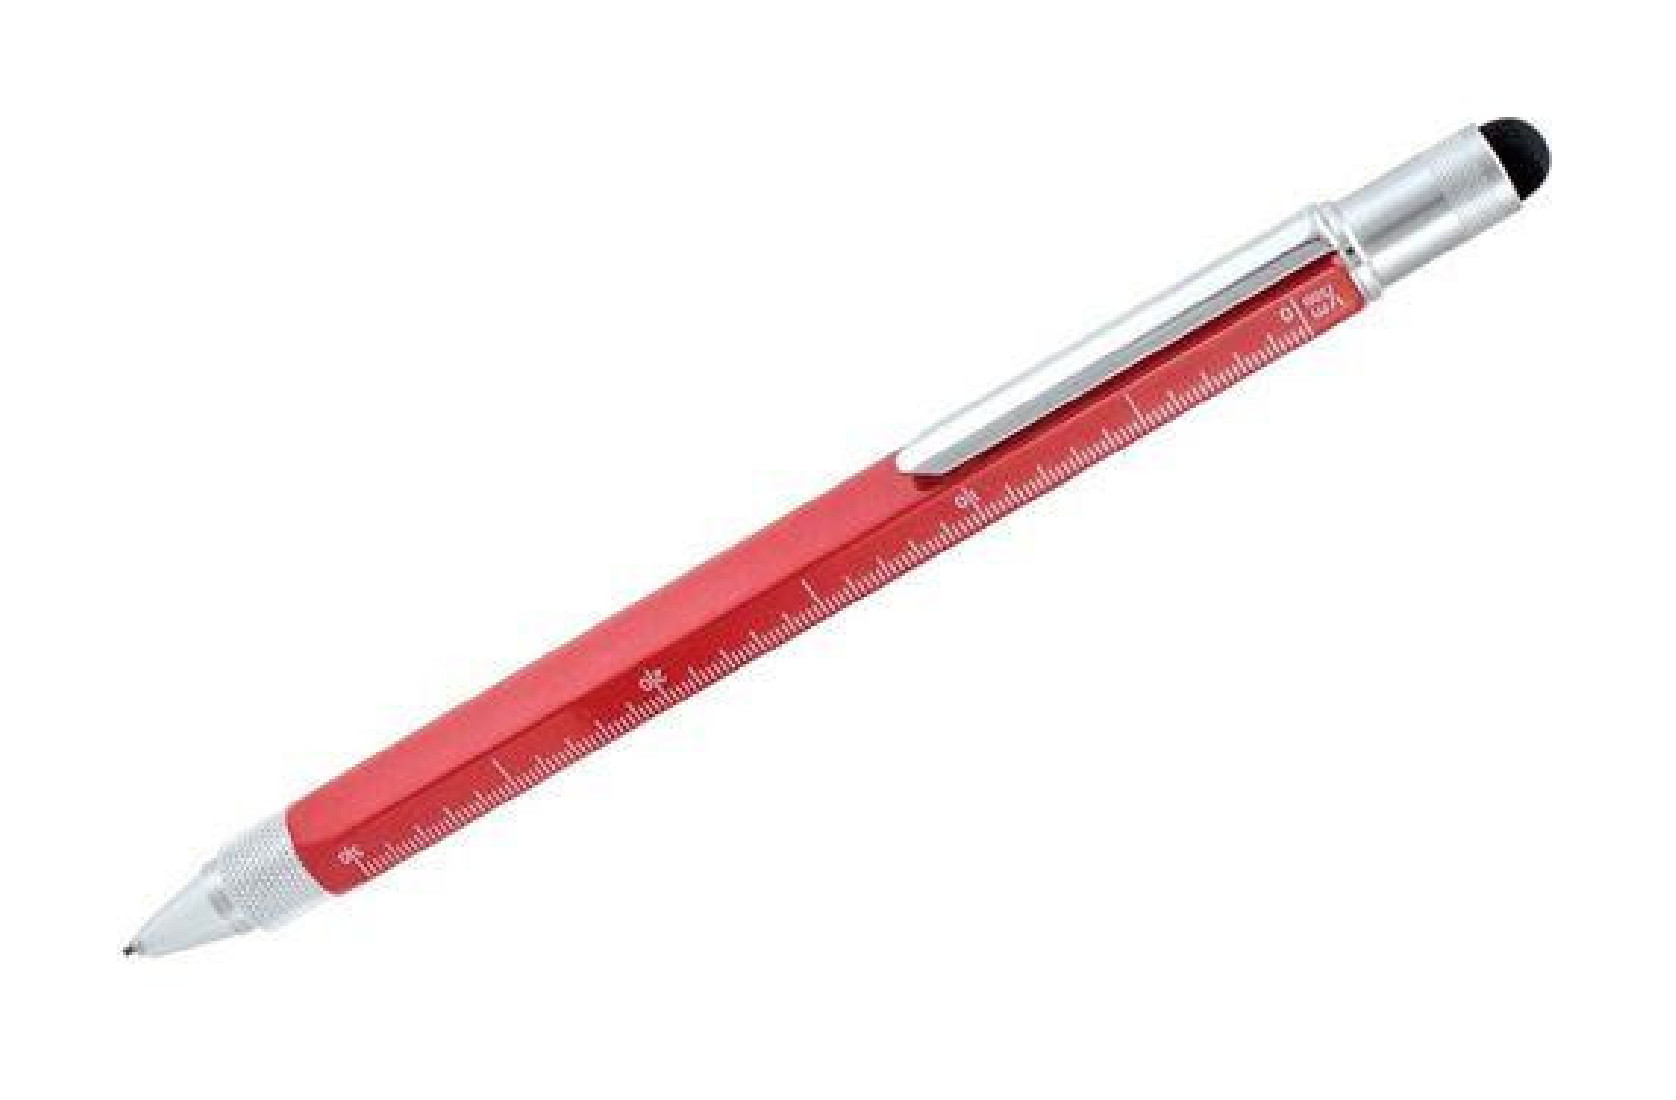 ONE TOUCH STYLUS 9 FUNCTION TOOL PENCIL RED MONTEVERDE